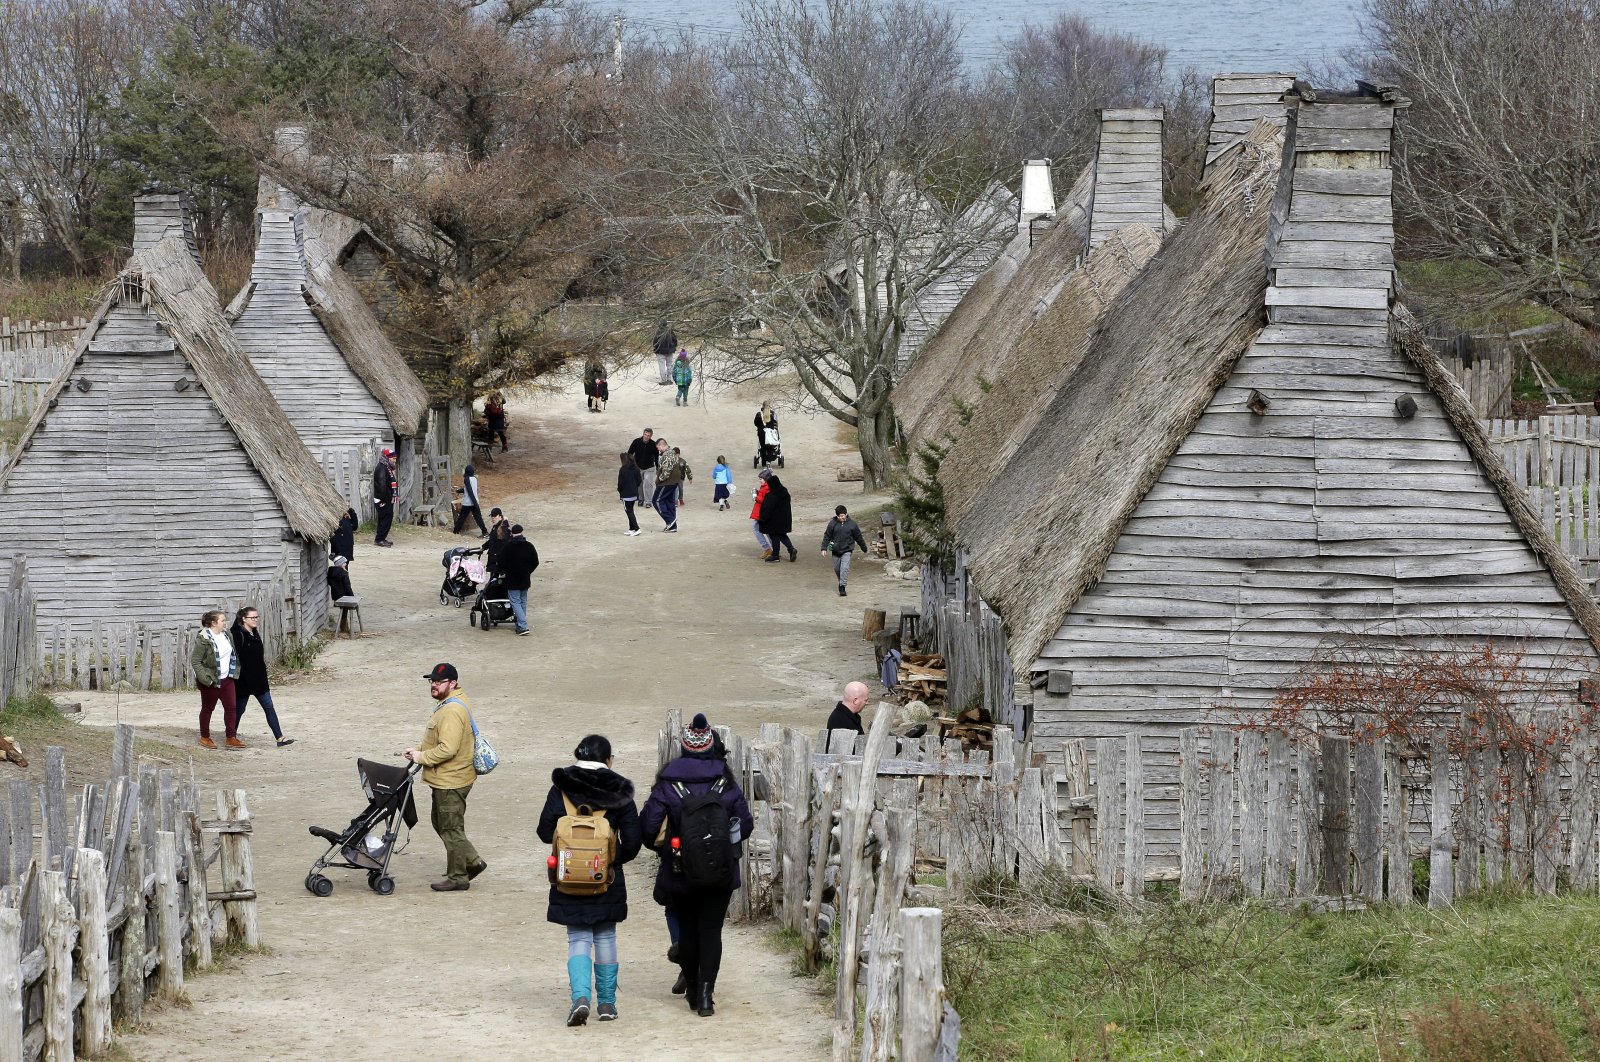 Visitors walk through the 17th-Century English Village exhibit at the Plimoth Patuxet Museums in Plymouth, Massachussets, Nov. 18, 2018. (AP Photo)